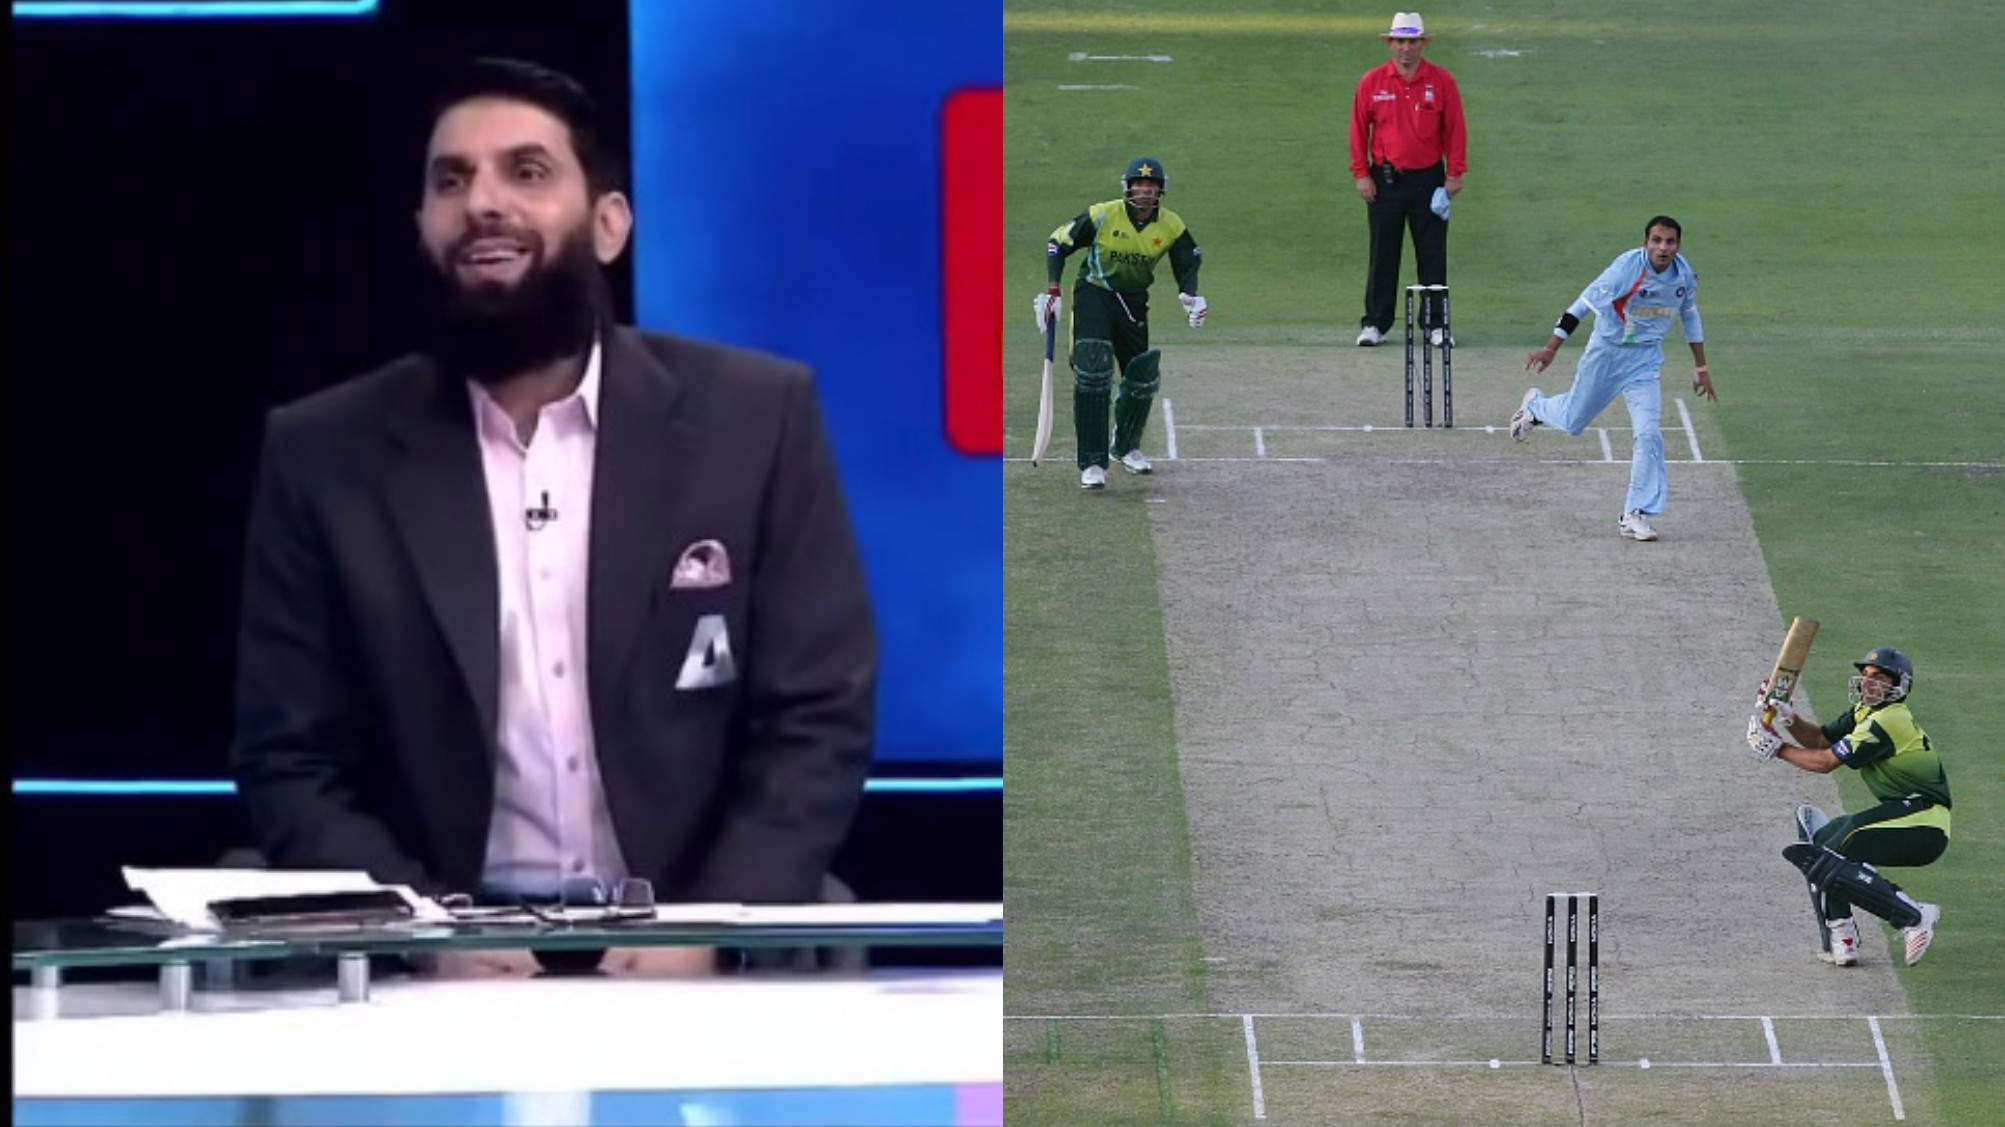 WATCH: “After my shot in 2007 T20 WC Final, they stopped”- Misbah’s hilarious reply to Wasim Akram’s question